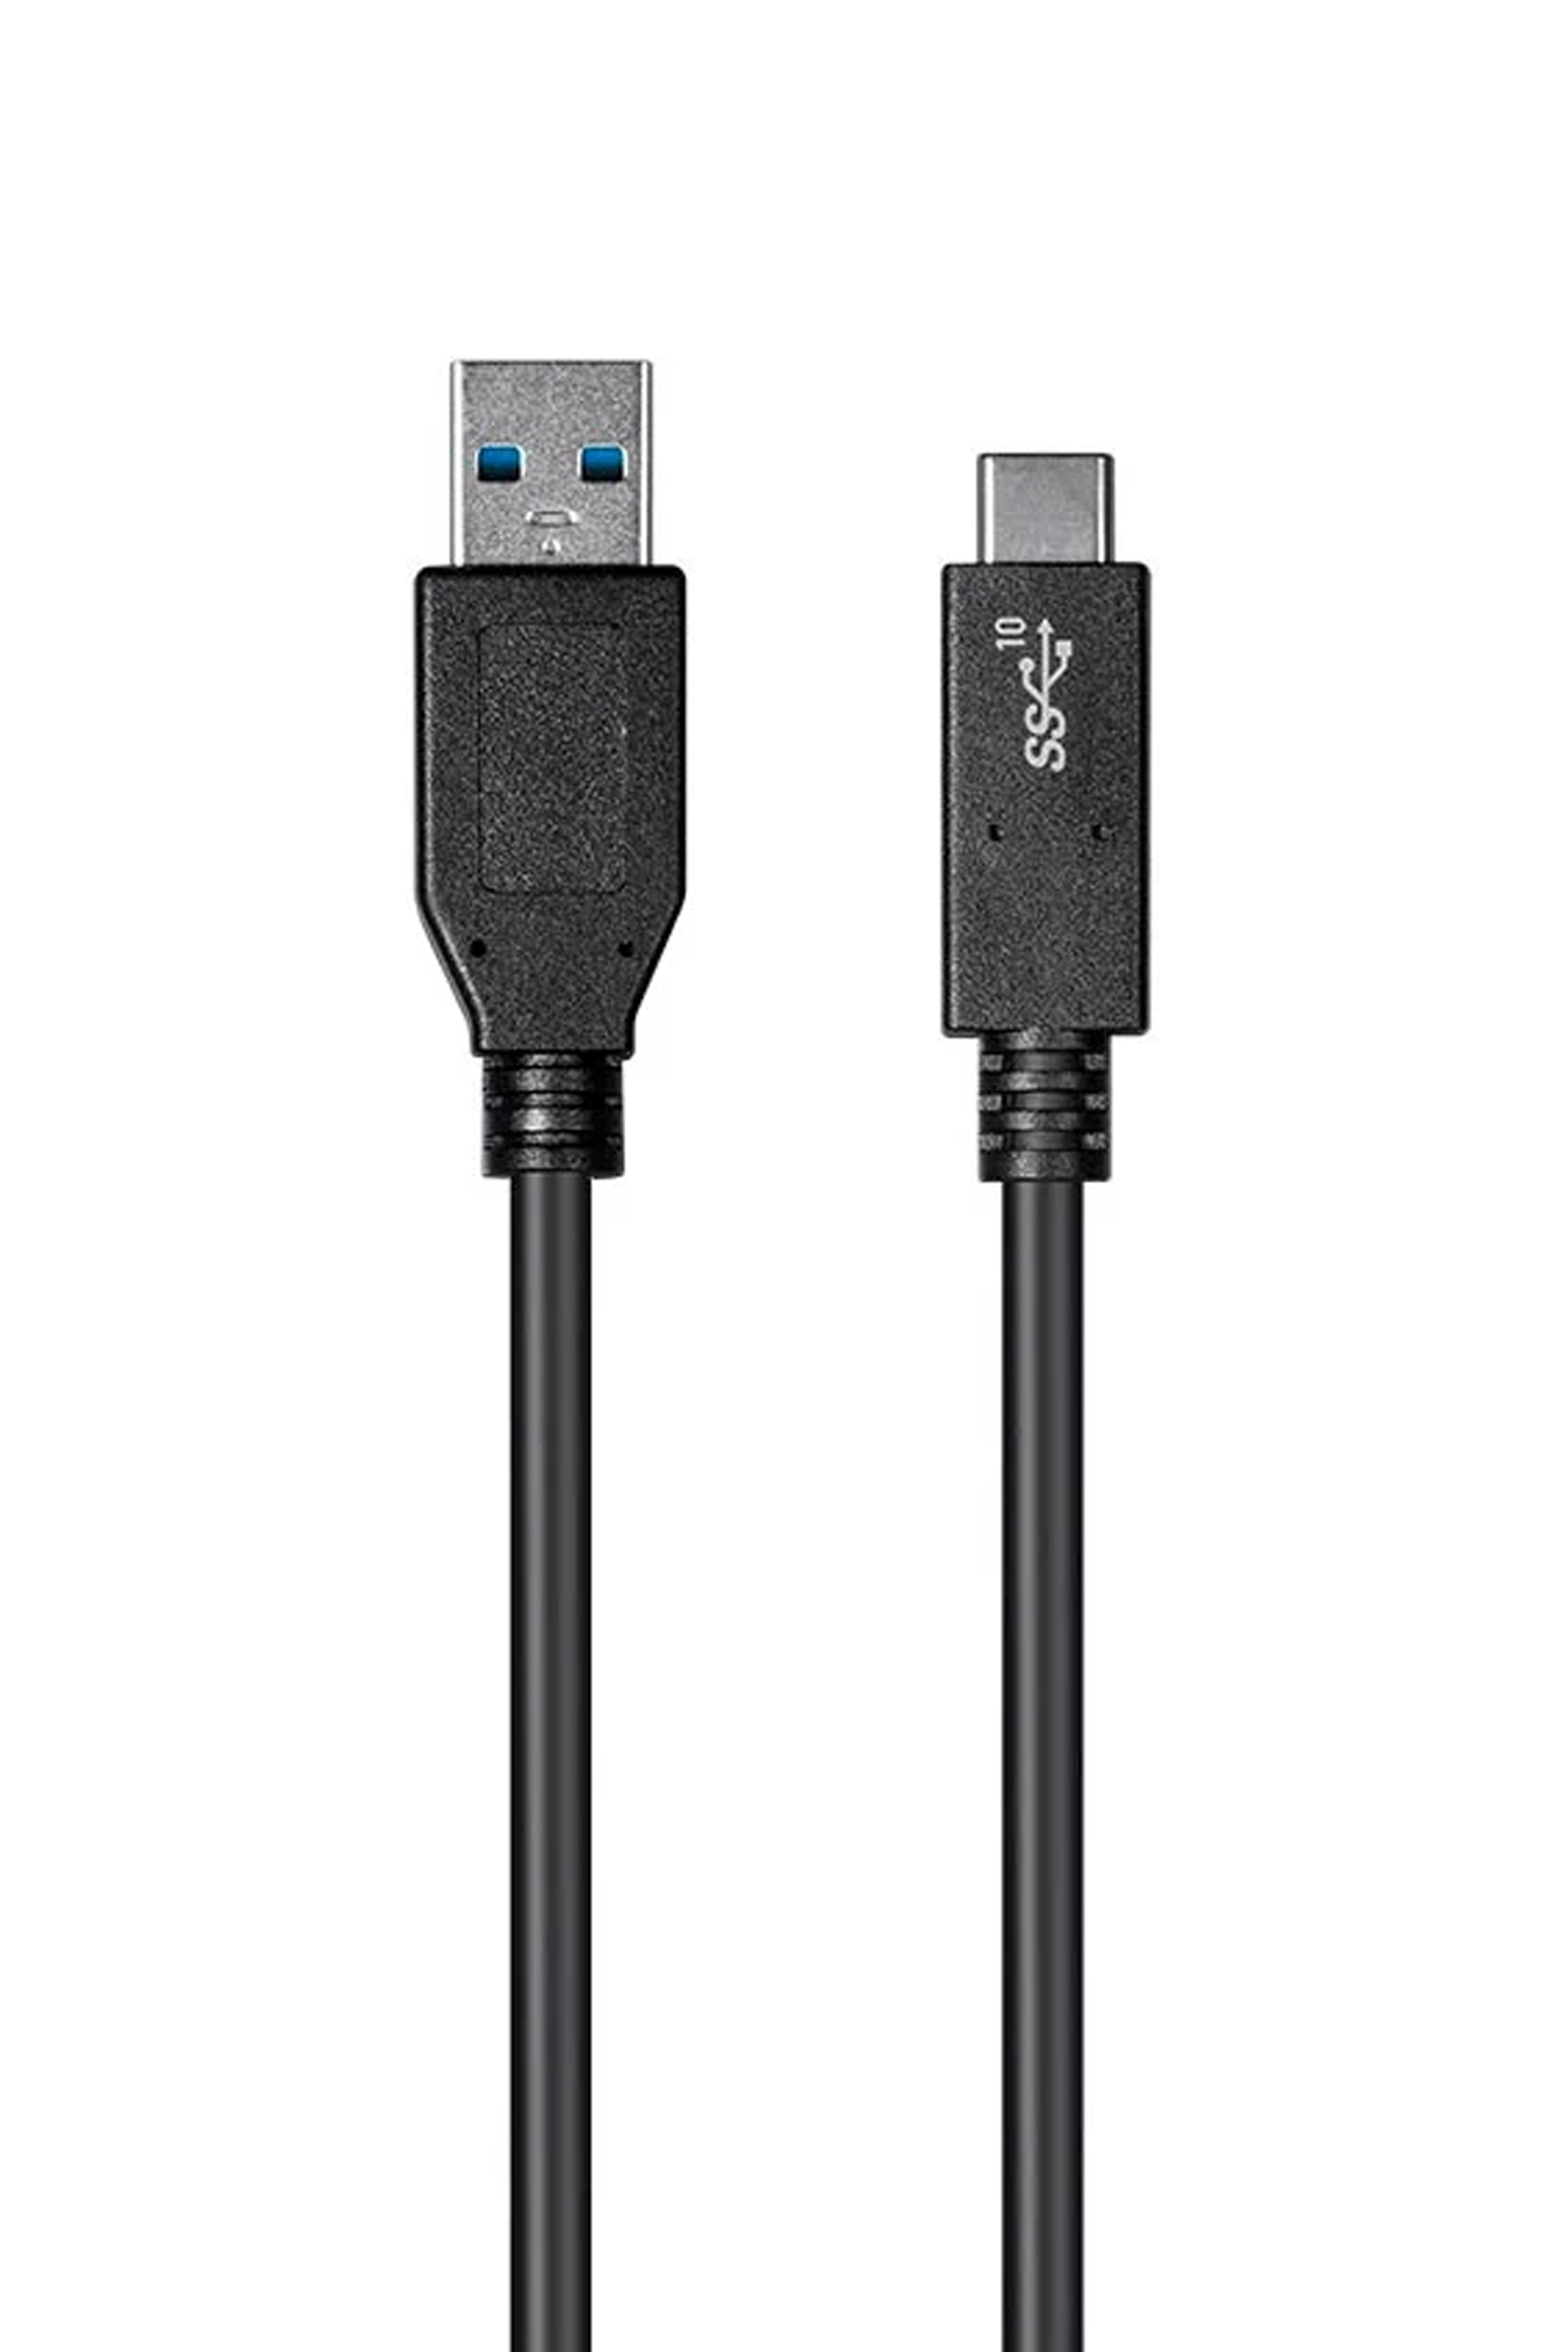 Monoprice Essentials USB-C to USB-A 3.1 Gen 2 Cable